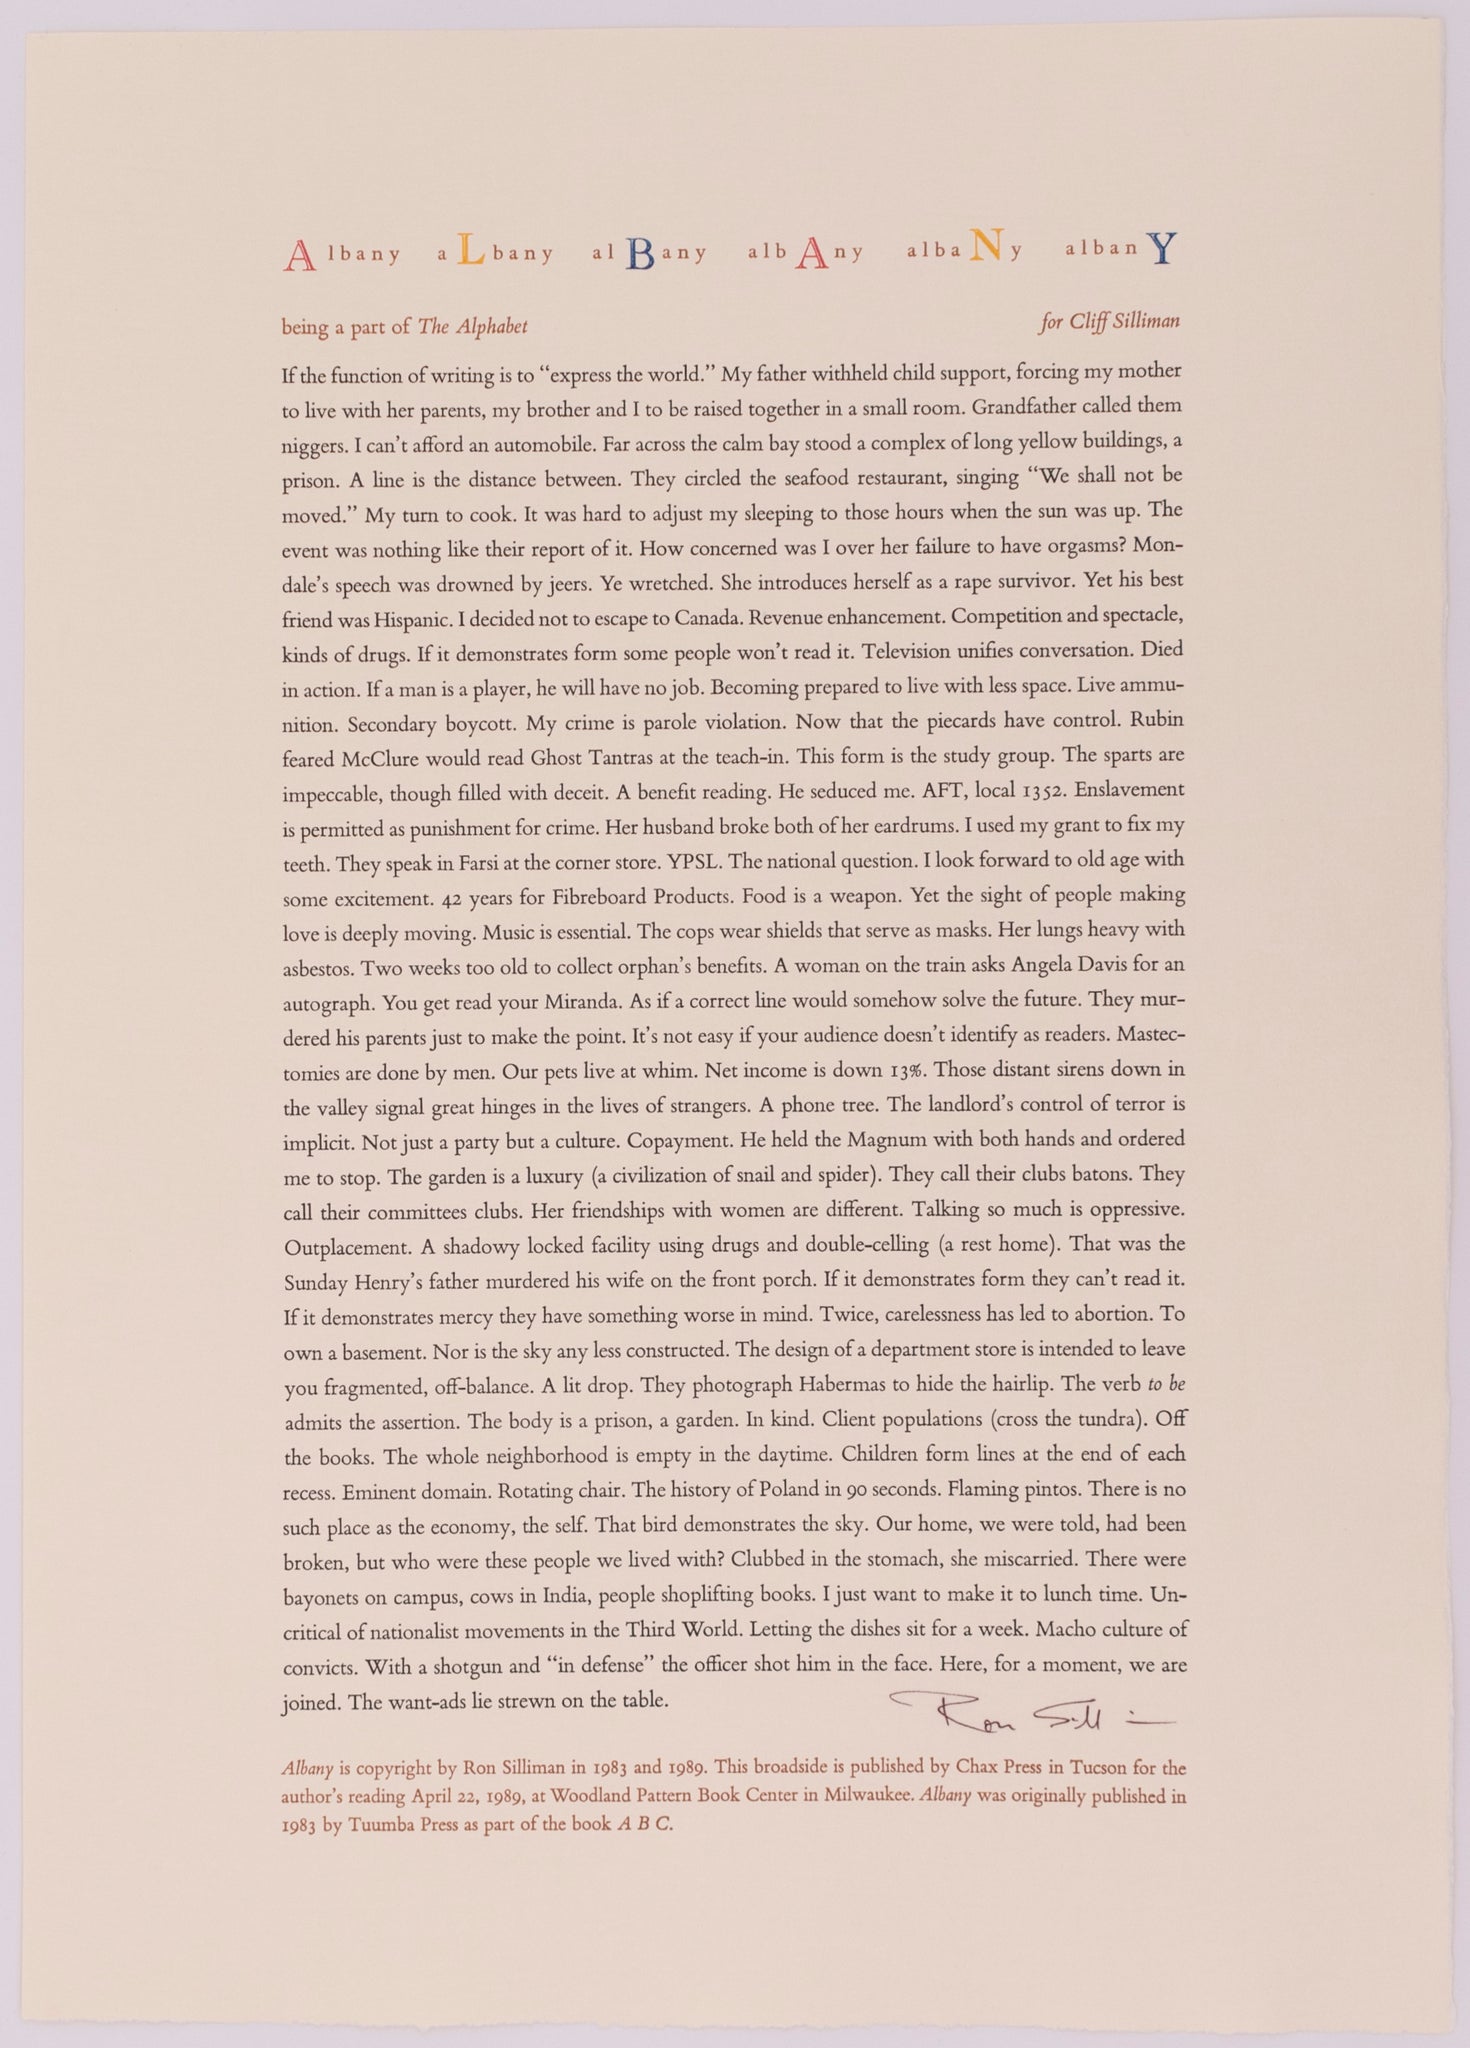 Broadside titled Albany by Ron Silliman. Red yellow blue brown and black text on cream paper.